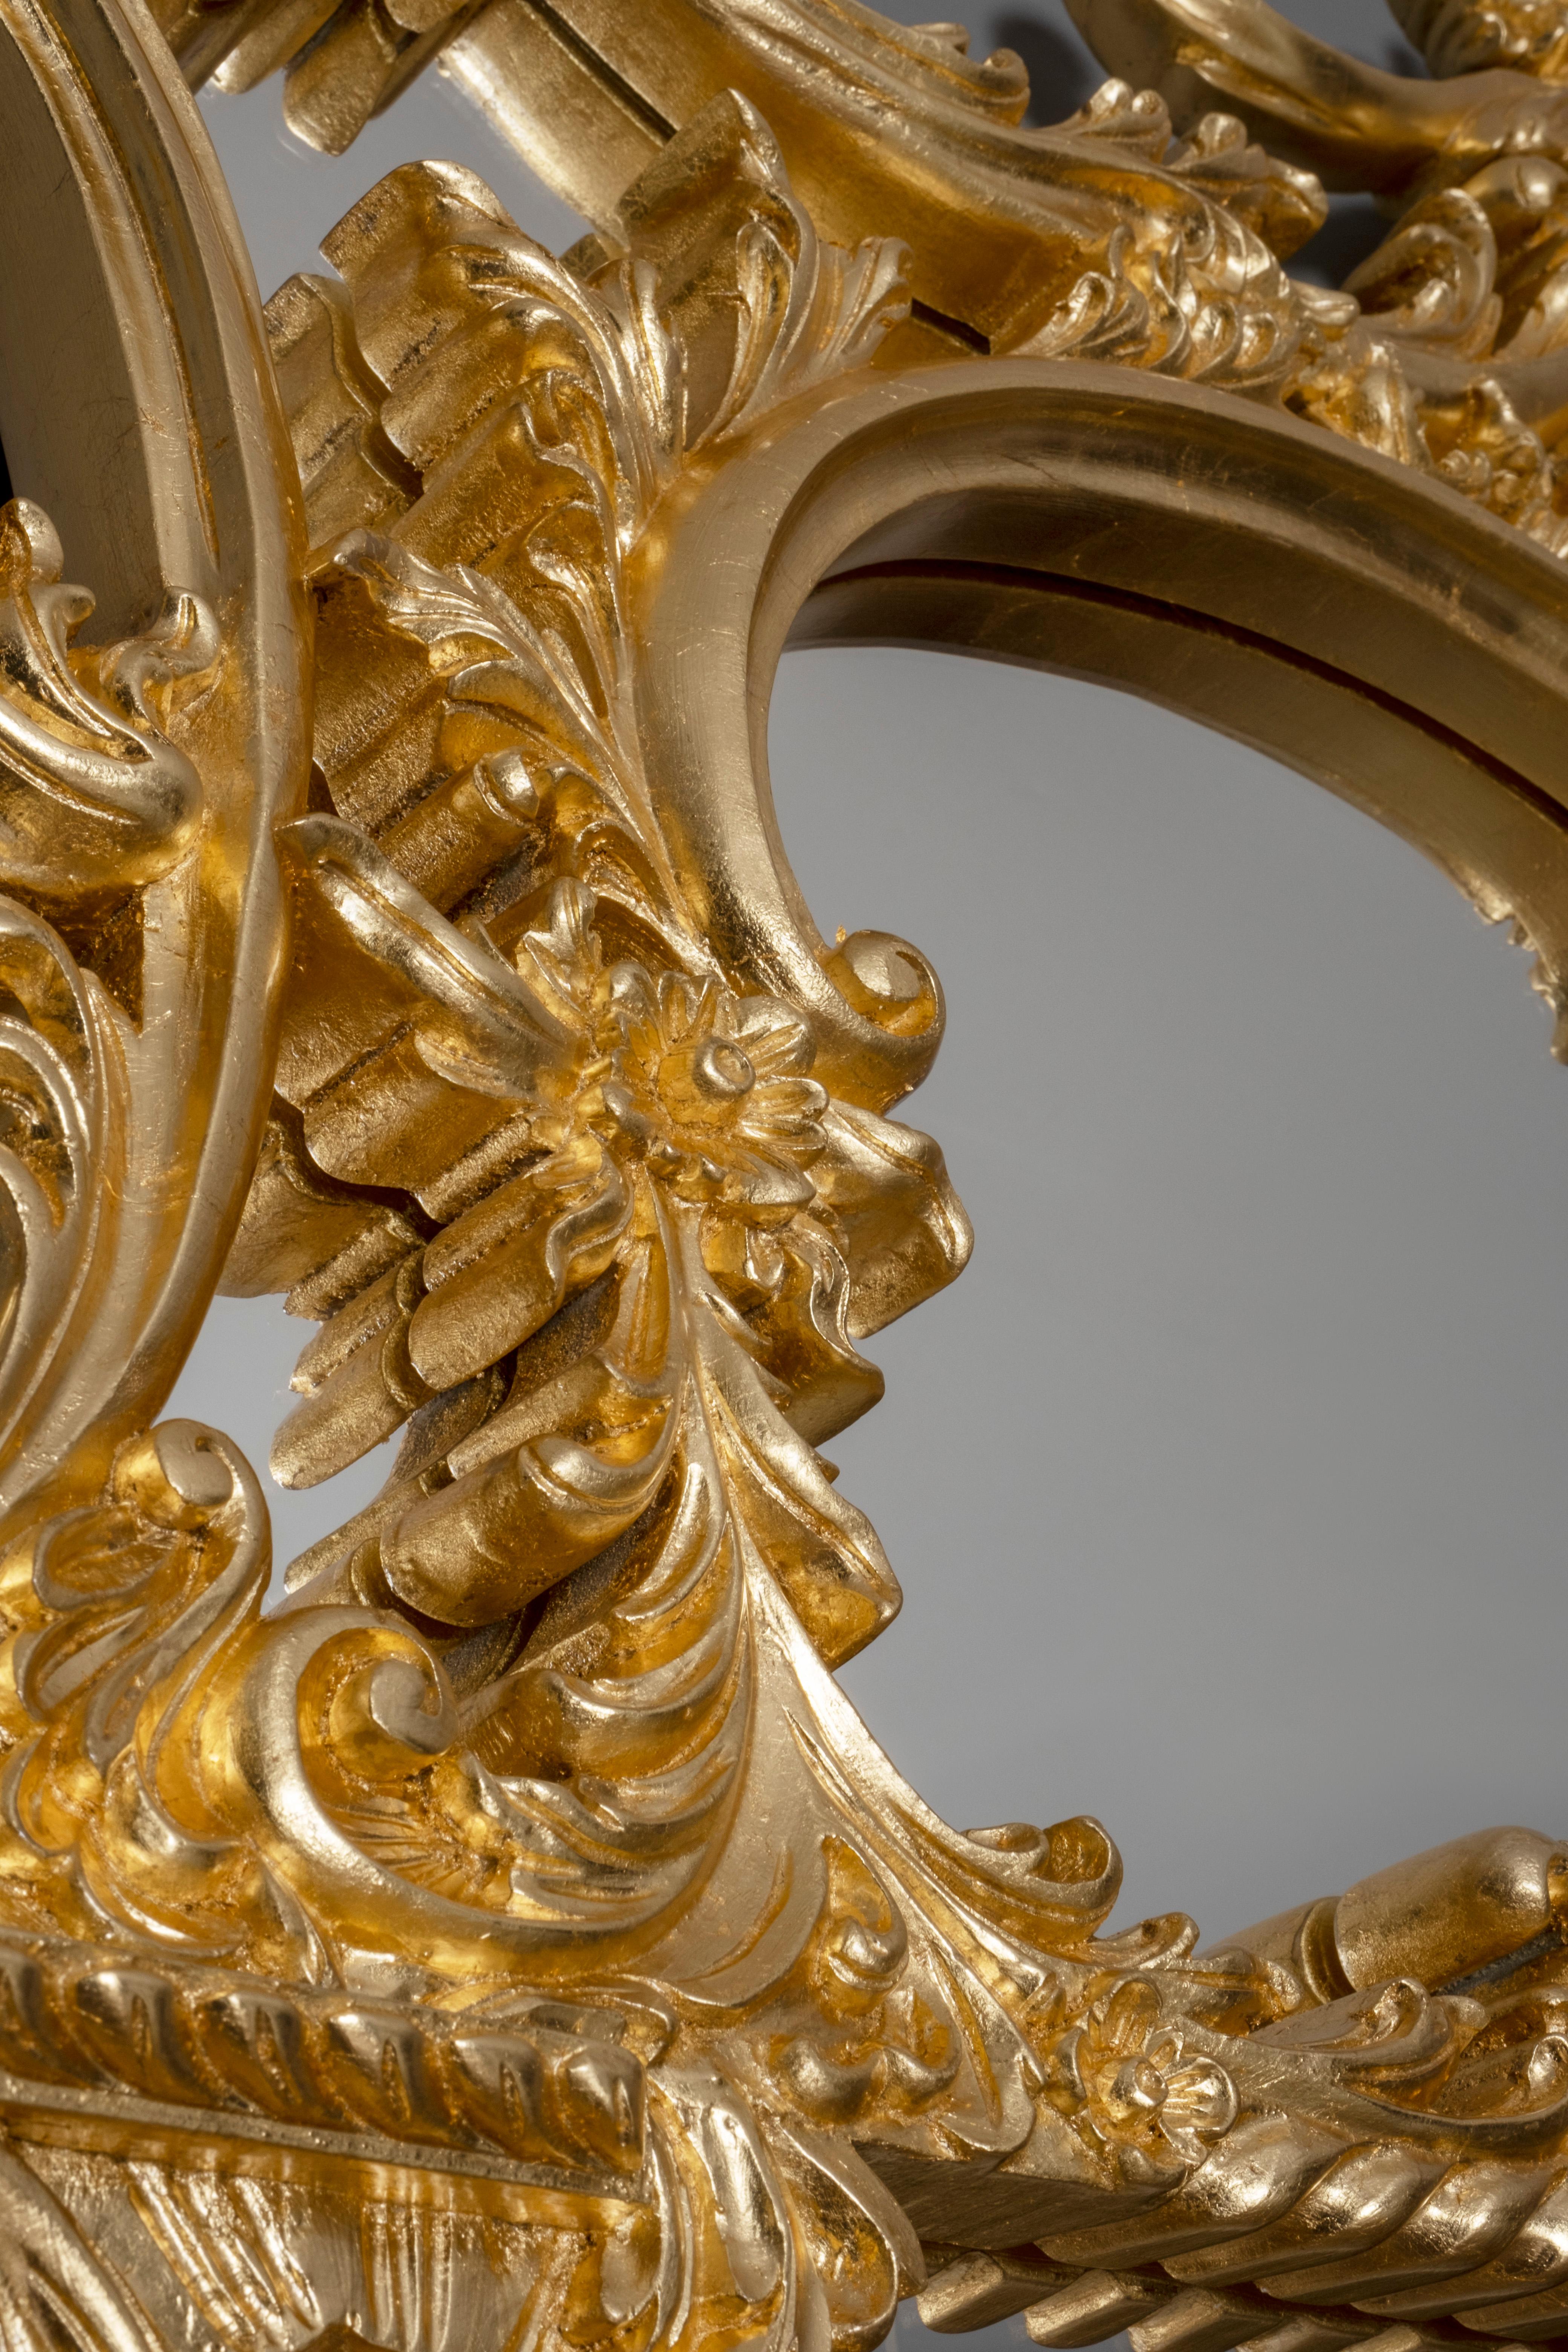 French Neoclassical Mirror Grandioso, French Neoclassical Collection, handcrafted in Portugal - Europe by GF Modern.

A French Neoclassical Style Mirror, Hand Carved in Linden Wood finished by hand with sumptuous gold leaf.

Mirror Grandioso